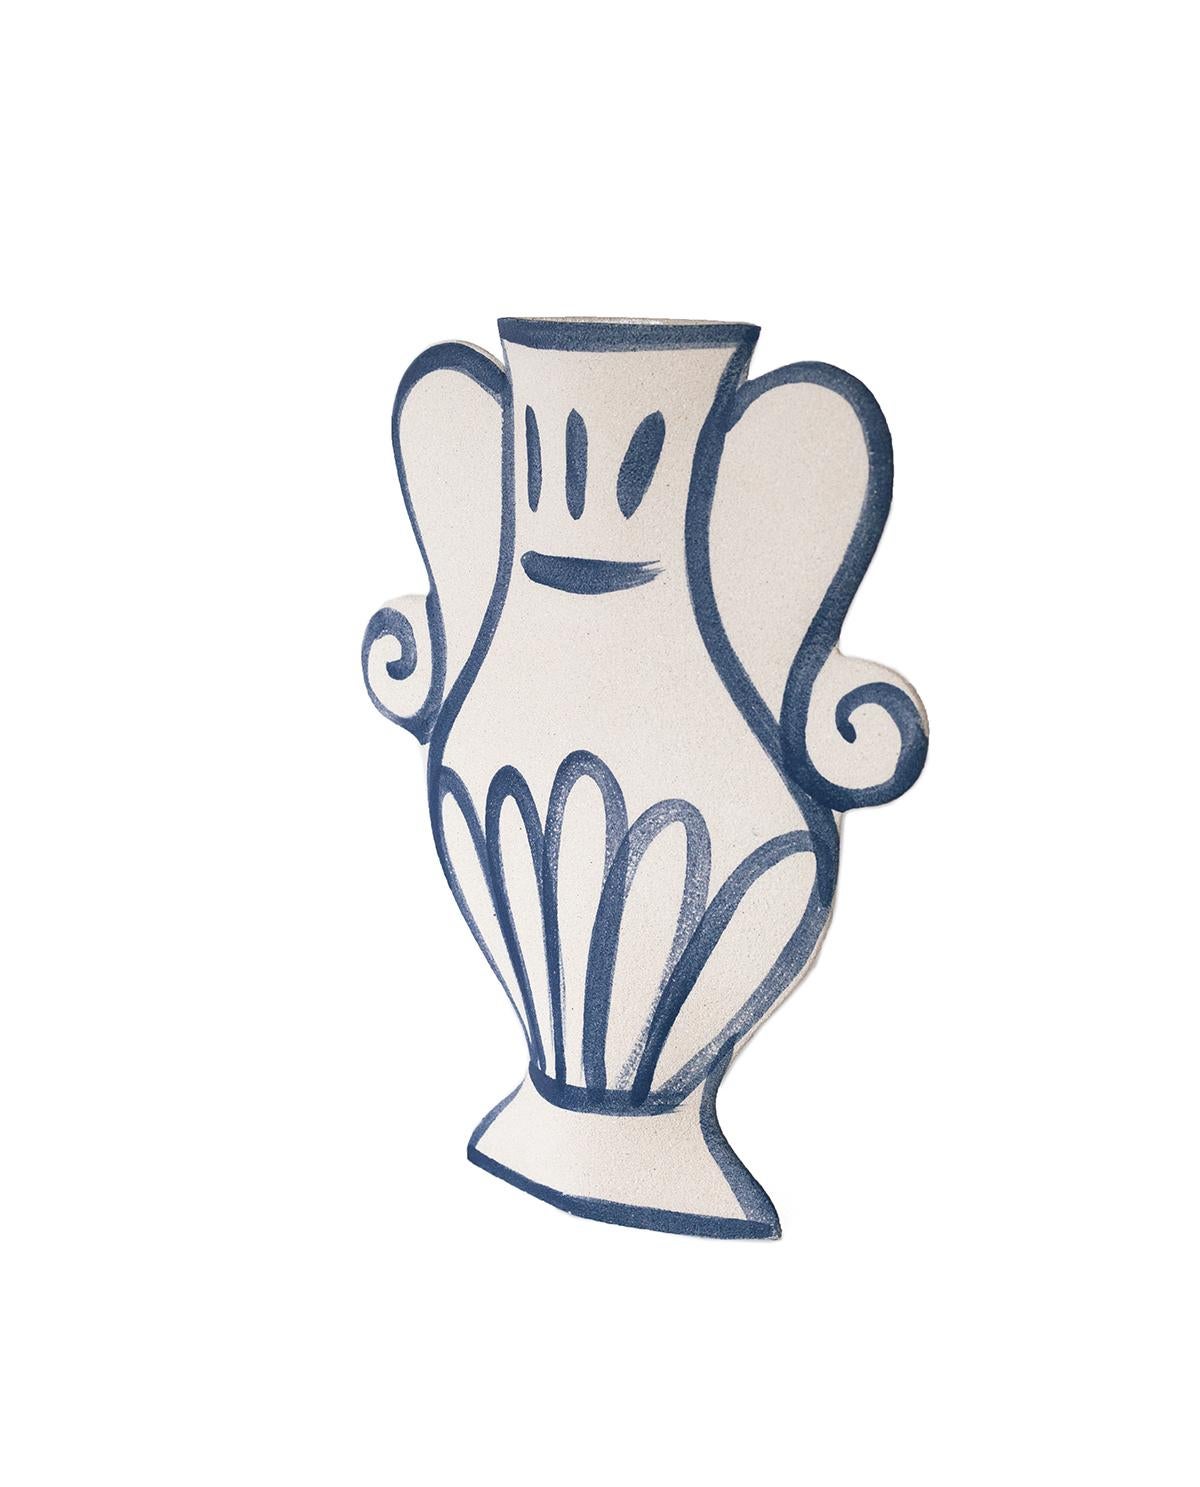 A part of a captivating new line blending ancient Greek pottery with contemporary design, the ‘Krater N°2’ vase showcases delicate blue underglaze illustrations that harmonize traditional and modern aesthetics.
Crafted by our designer, the blue